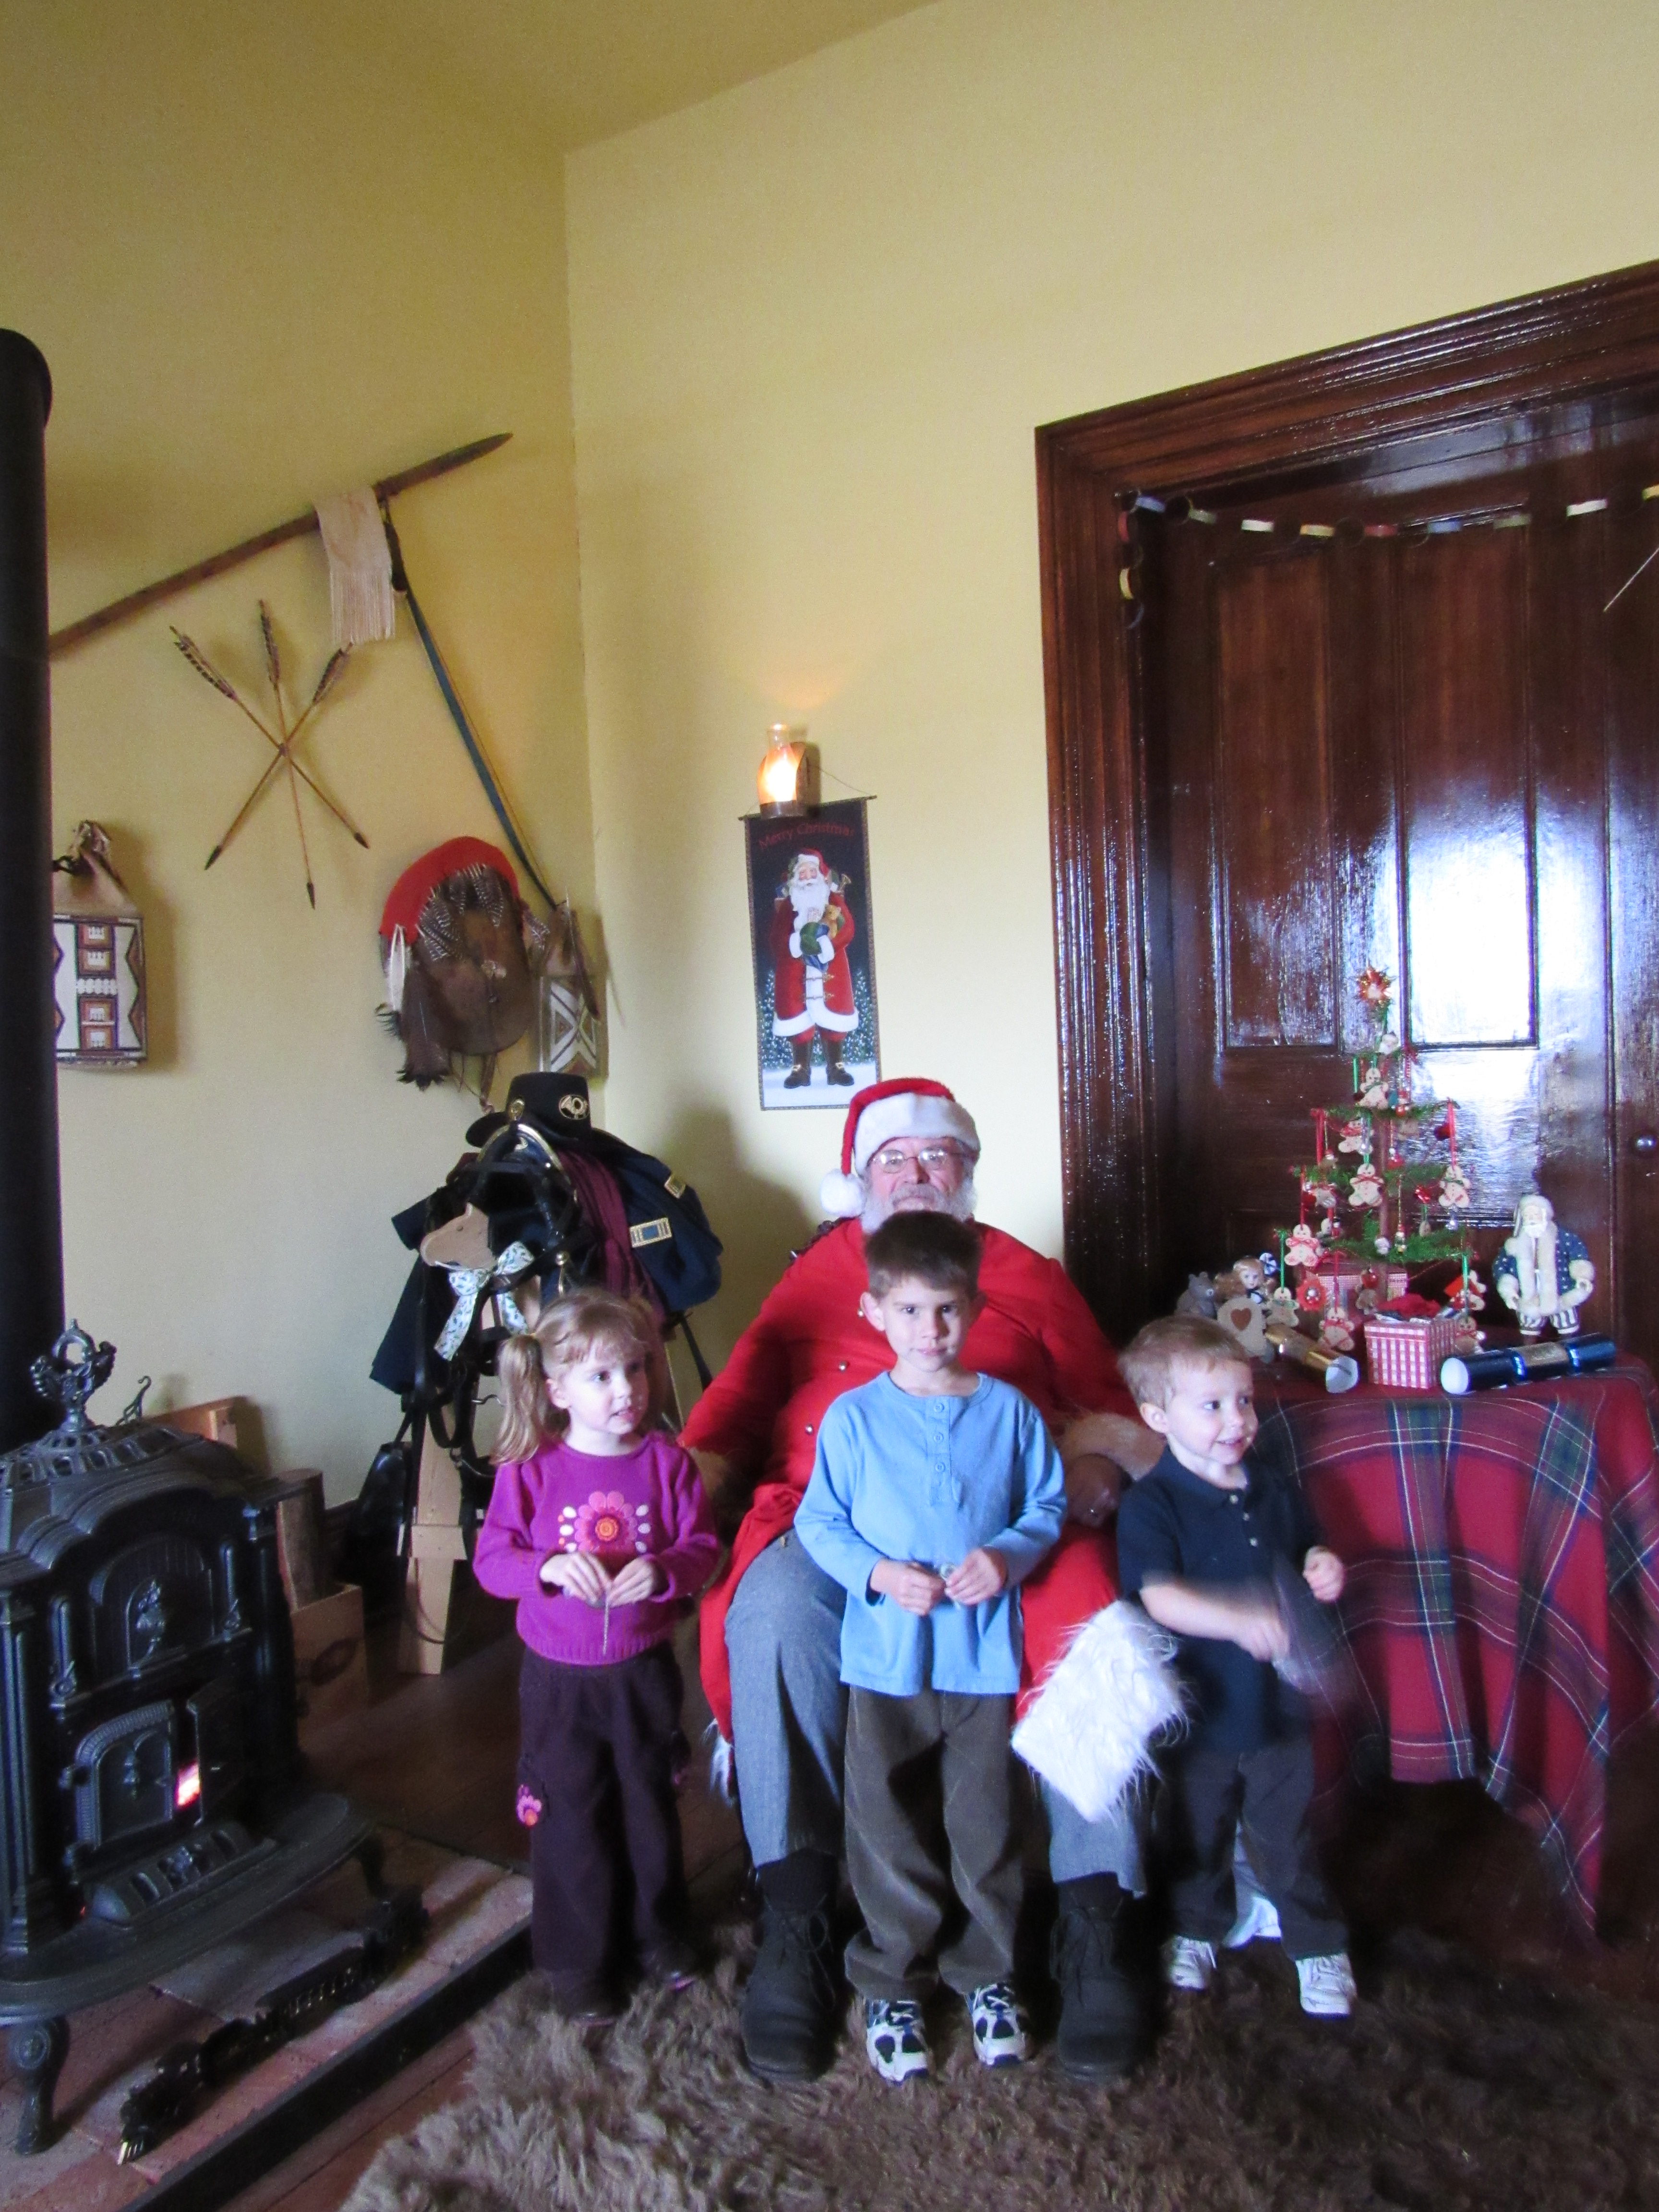 Three young children having their picture taken with Santa Claus in a period room.